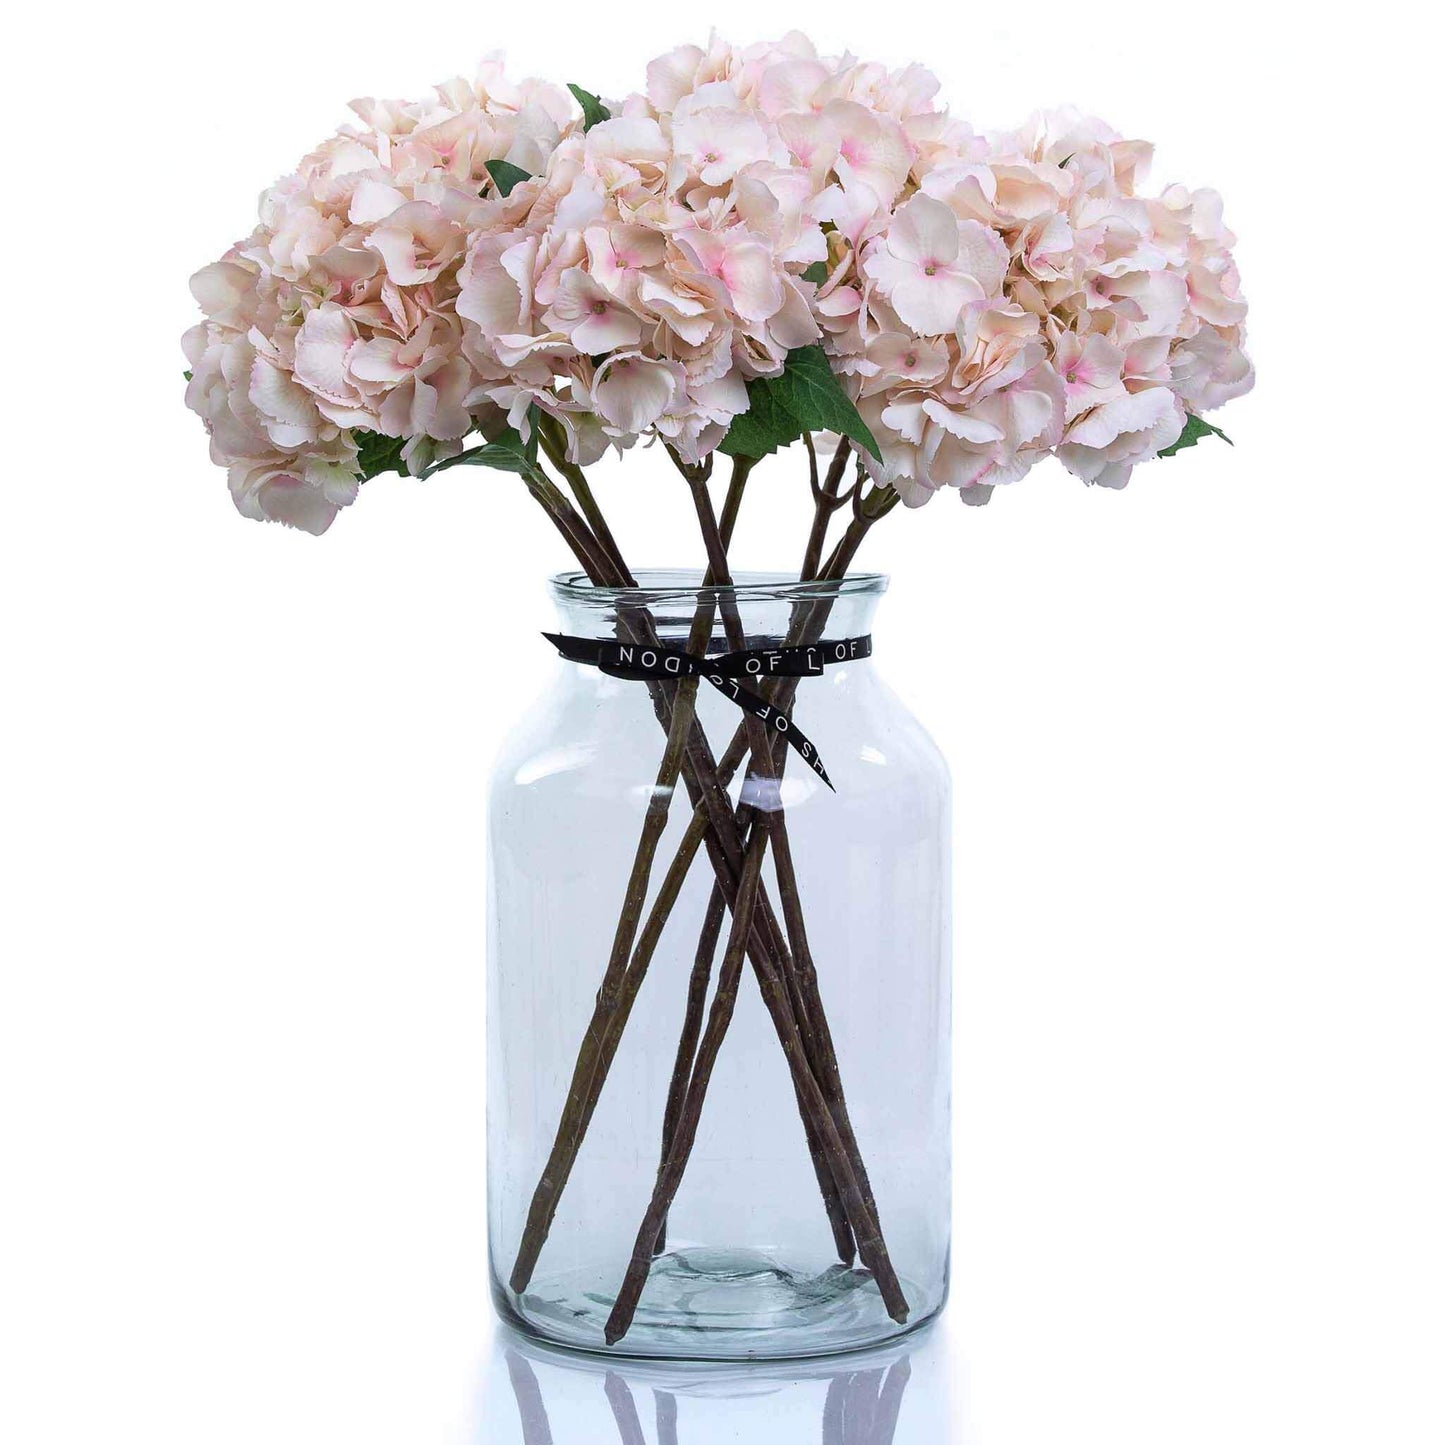 Large luxury pale pink hydrangea bouquet in apothecary vase